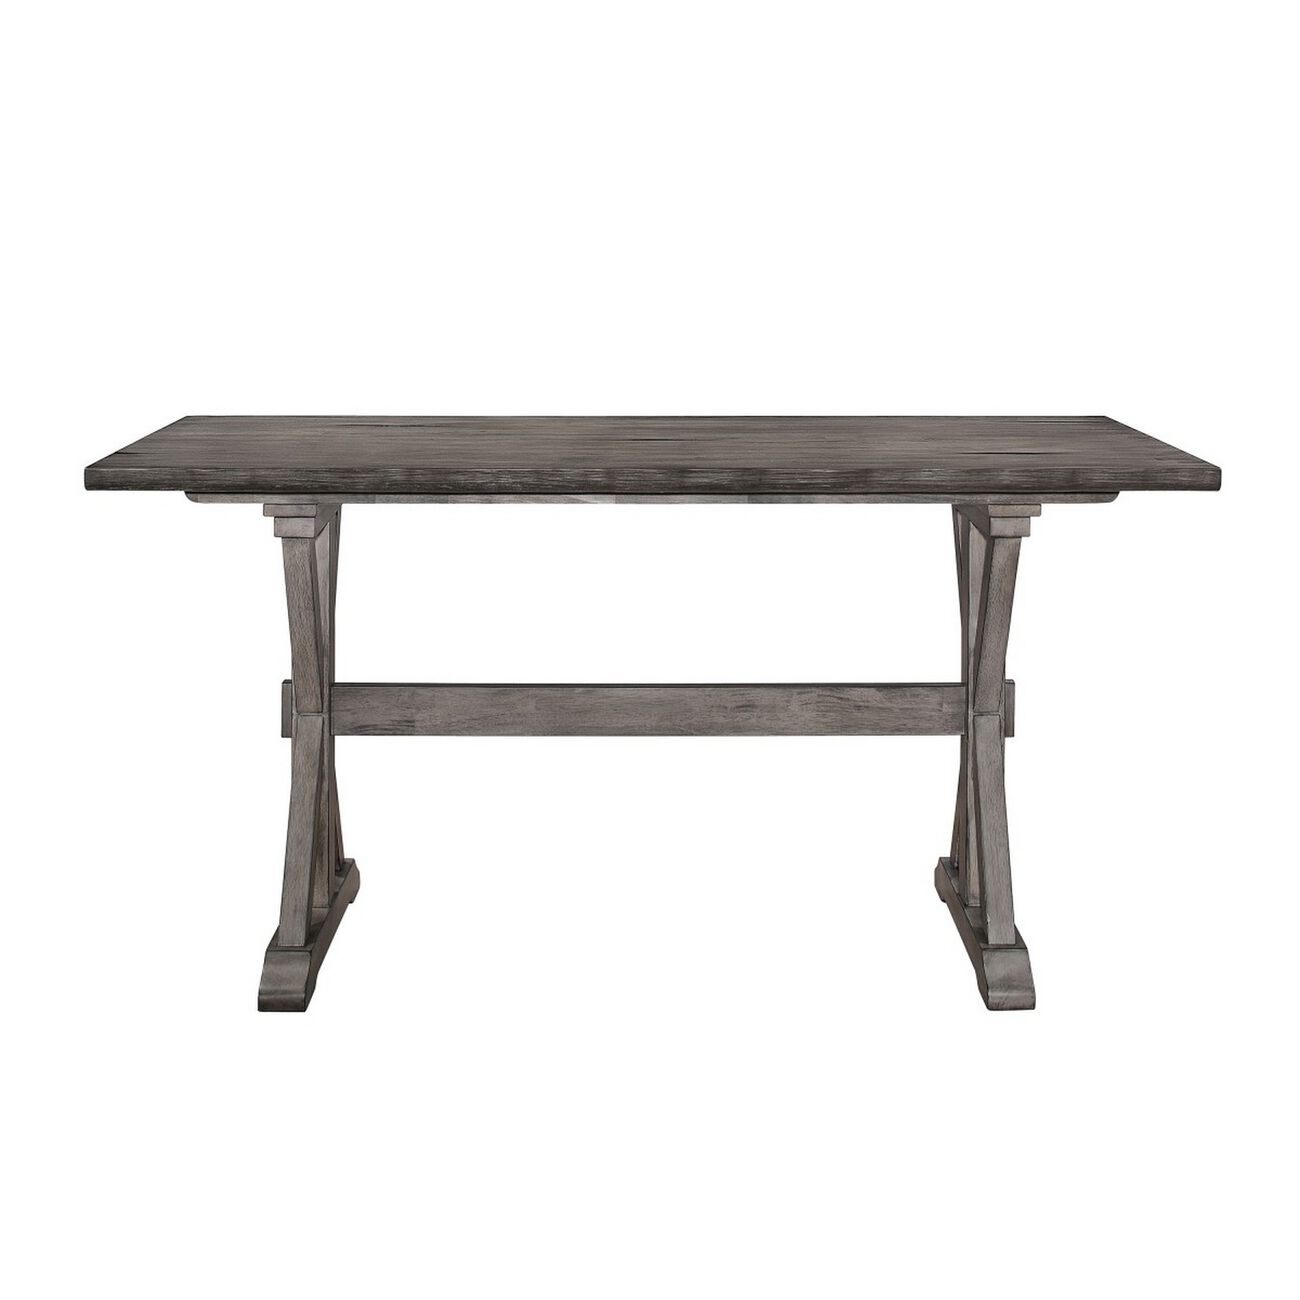 Wooden Farmhouse Style Counter Height Table with X Shaped Base, Gray